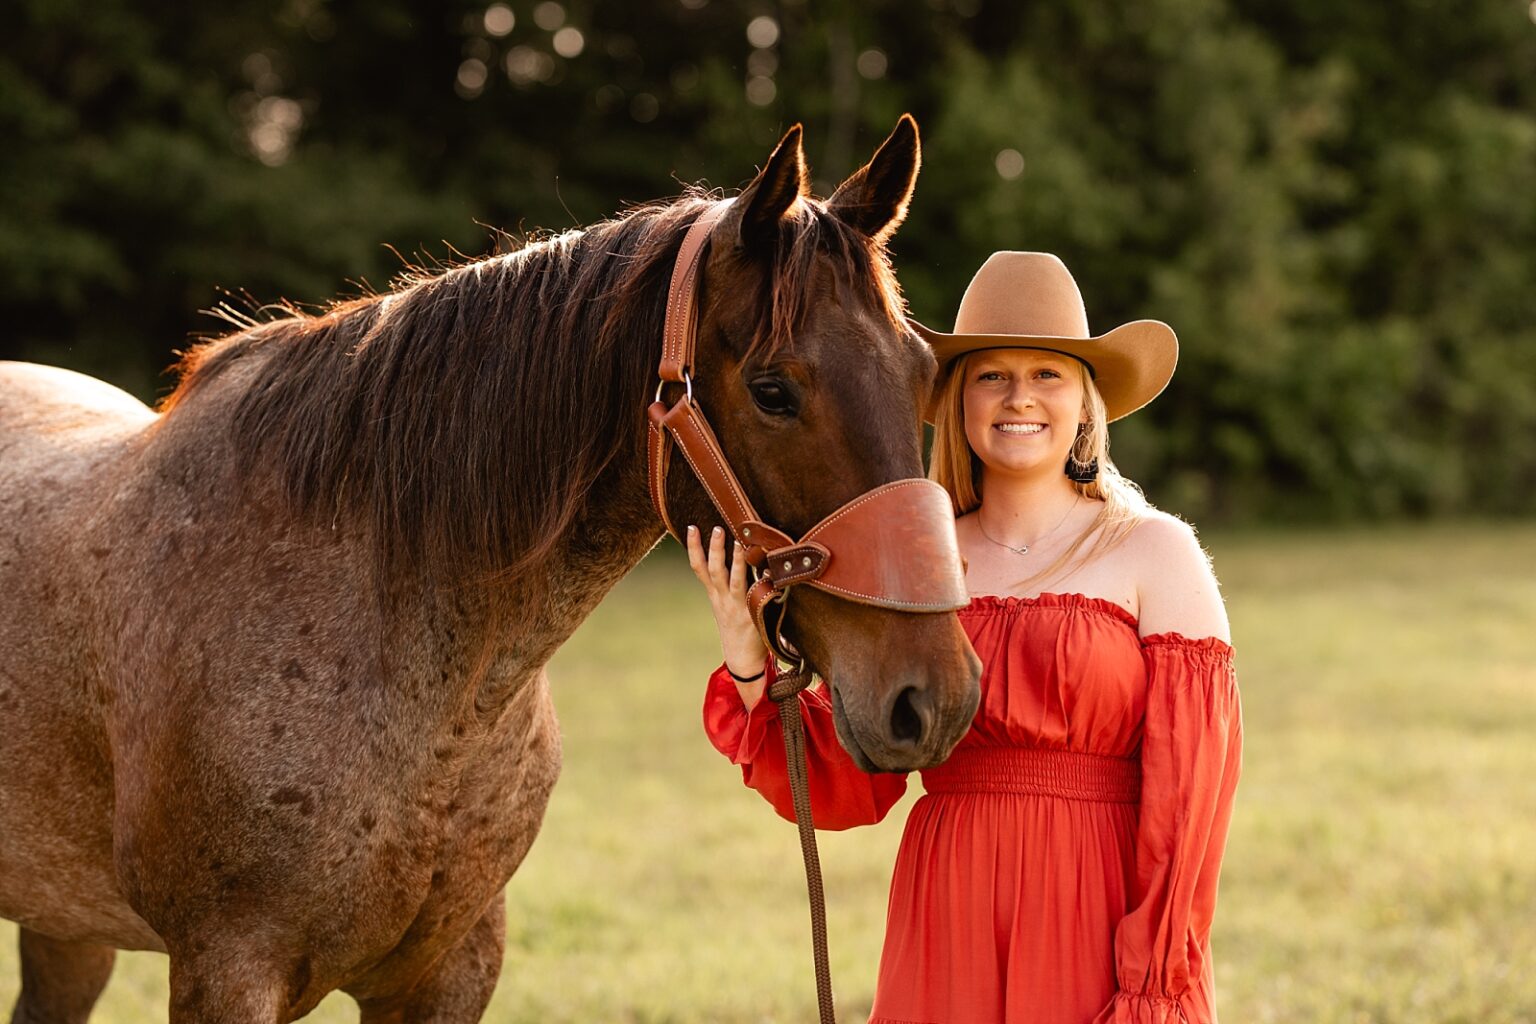 North Alabama western photographer takes pictures of cowgirl with gorgeous roan gelding near Huntsville, AL.